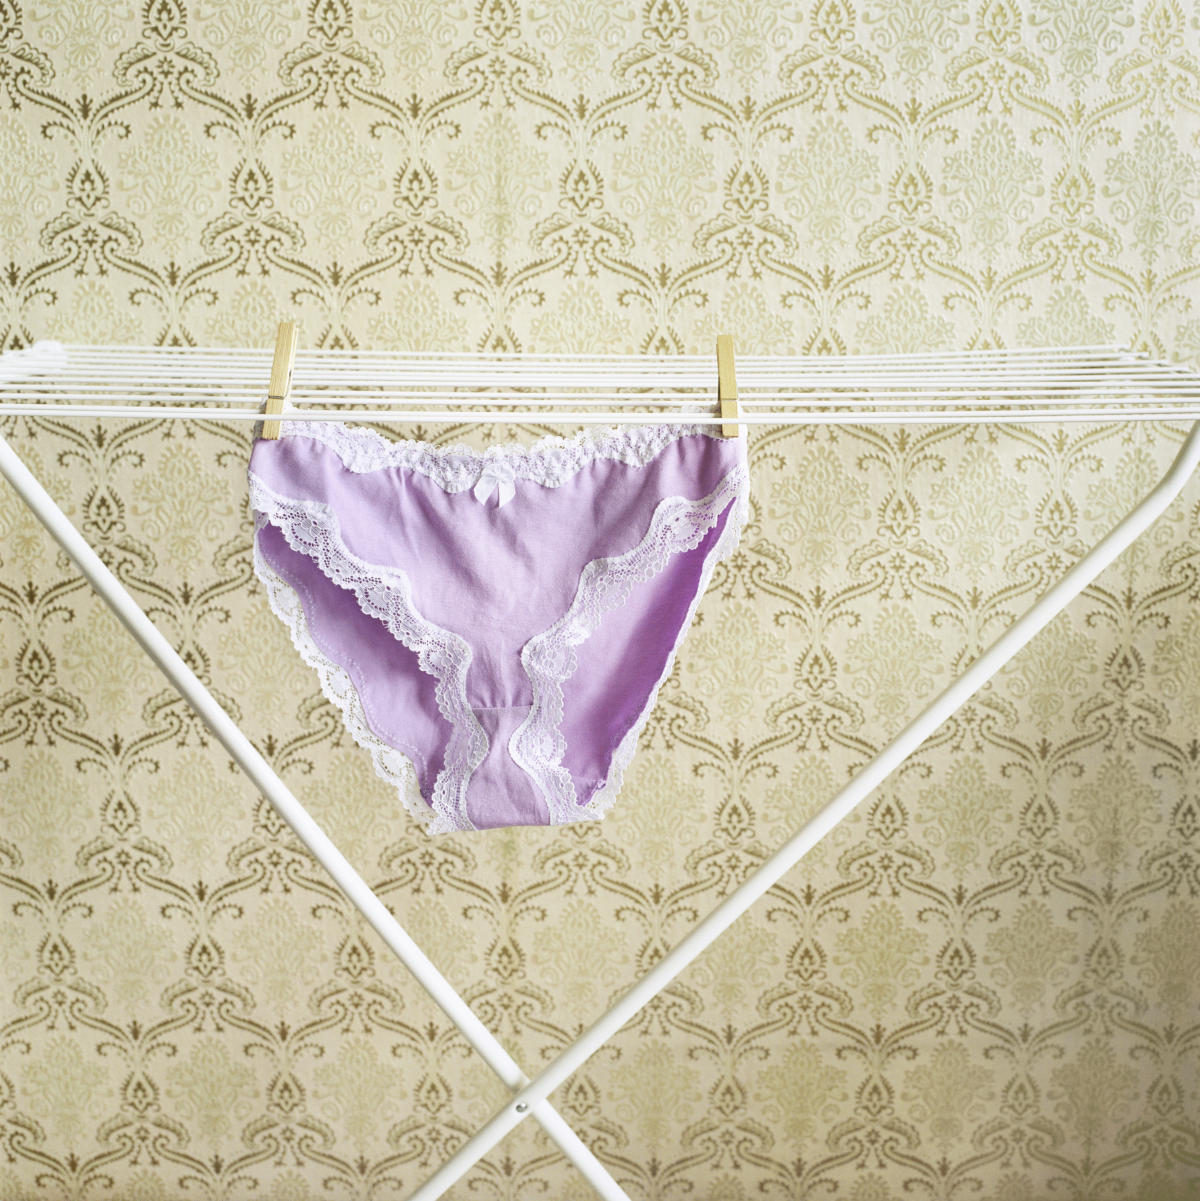 Ever noticed a bleached patch in your panties? Your vagina is to blame